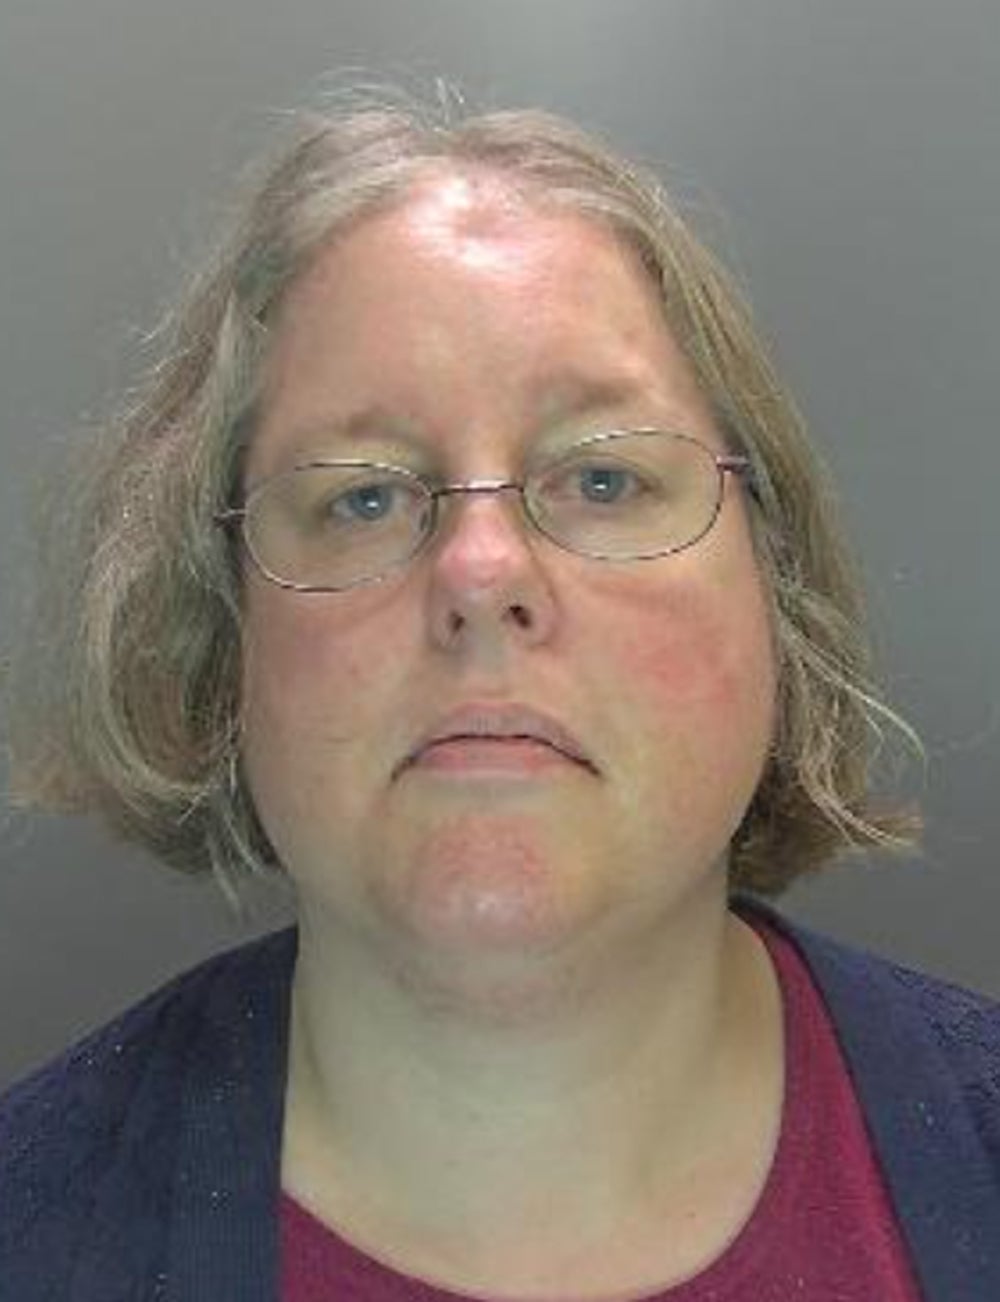 Auriol Grey was jailed for three years for the manslaughter of a 77-year-old cyclist